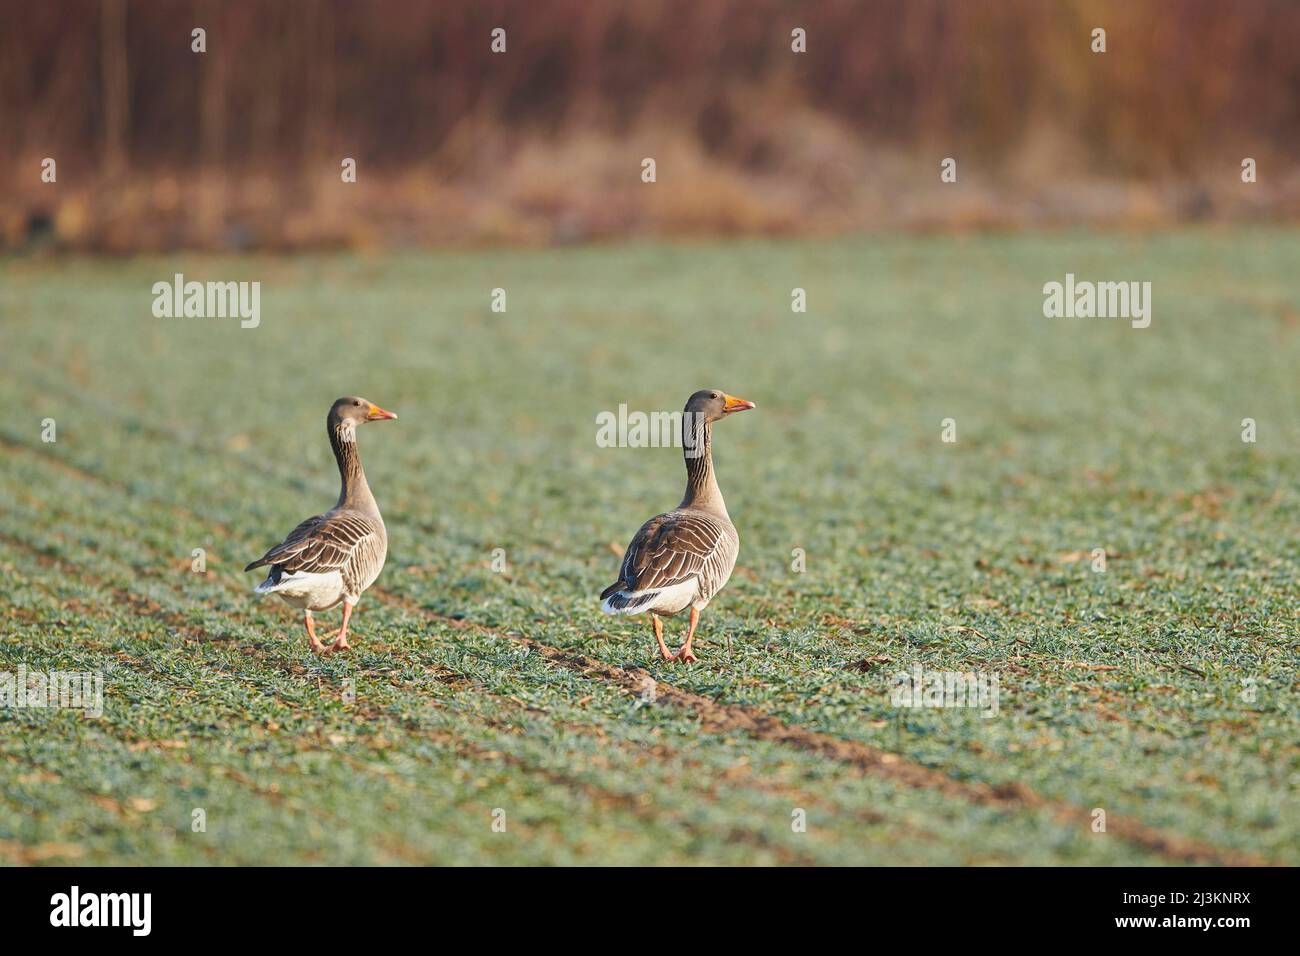 View taken from behind of two greylag geese (Anser anser) standing on a grassy field; Bavaria, Germany Stock Photo